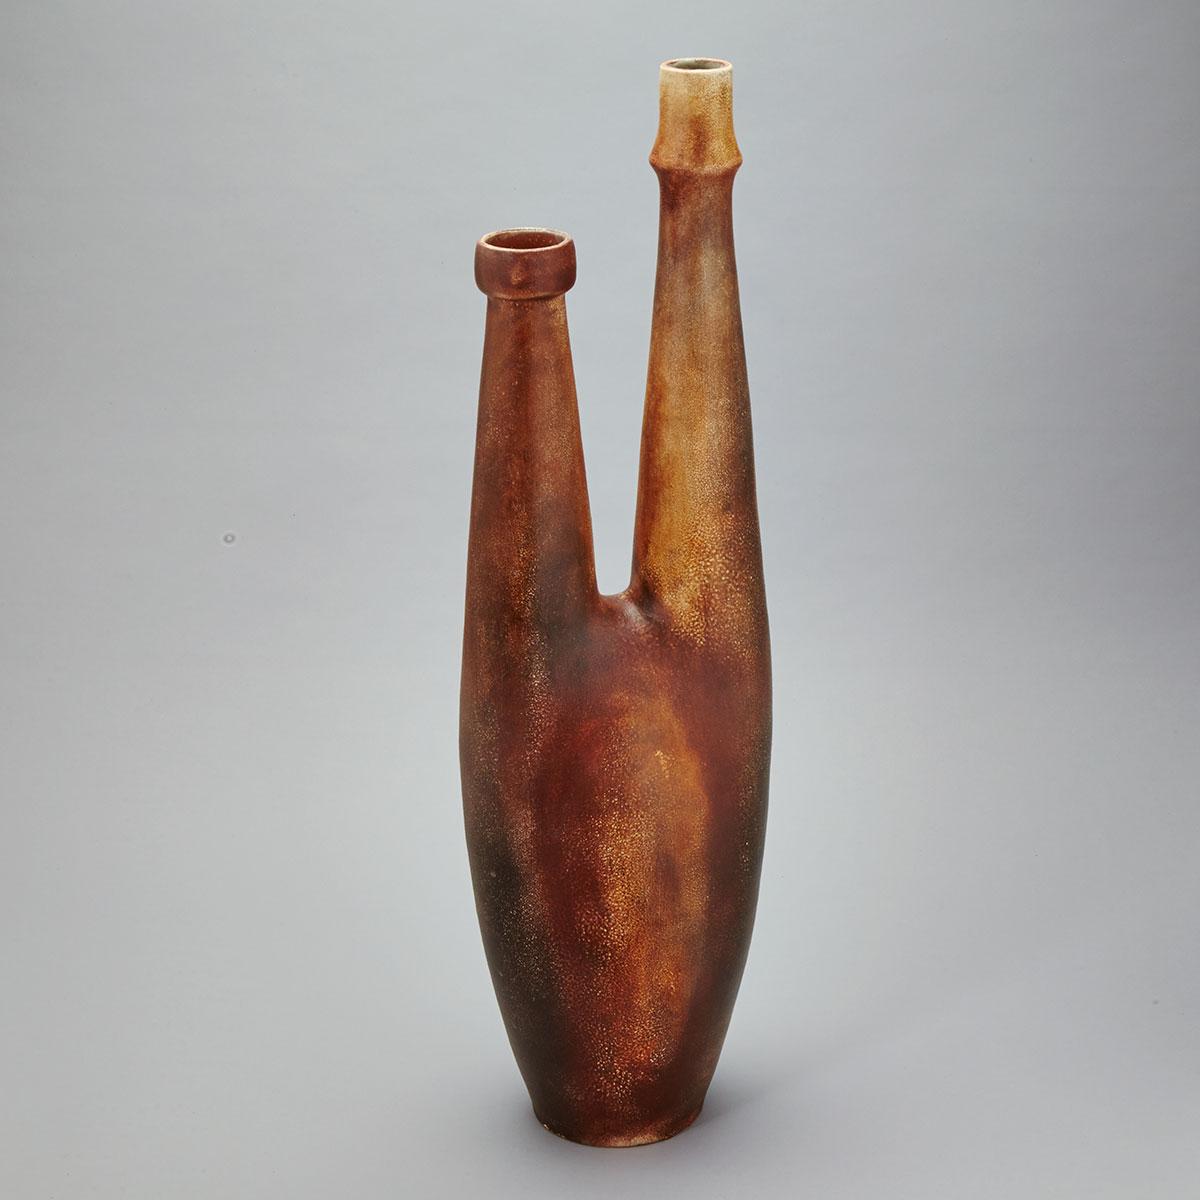 Brooklin Pottery Double Necked Vase, Theo and Susan Harlander, c.1960